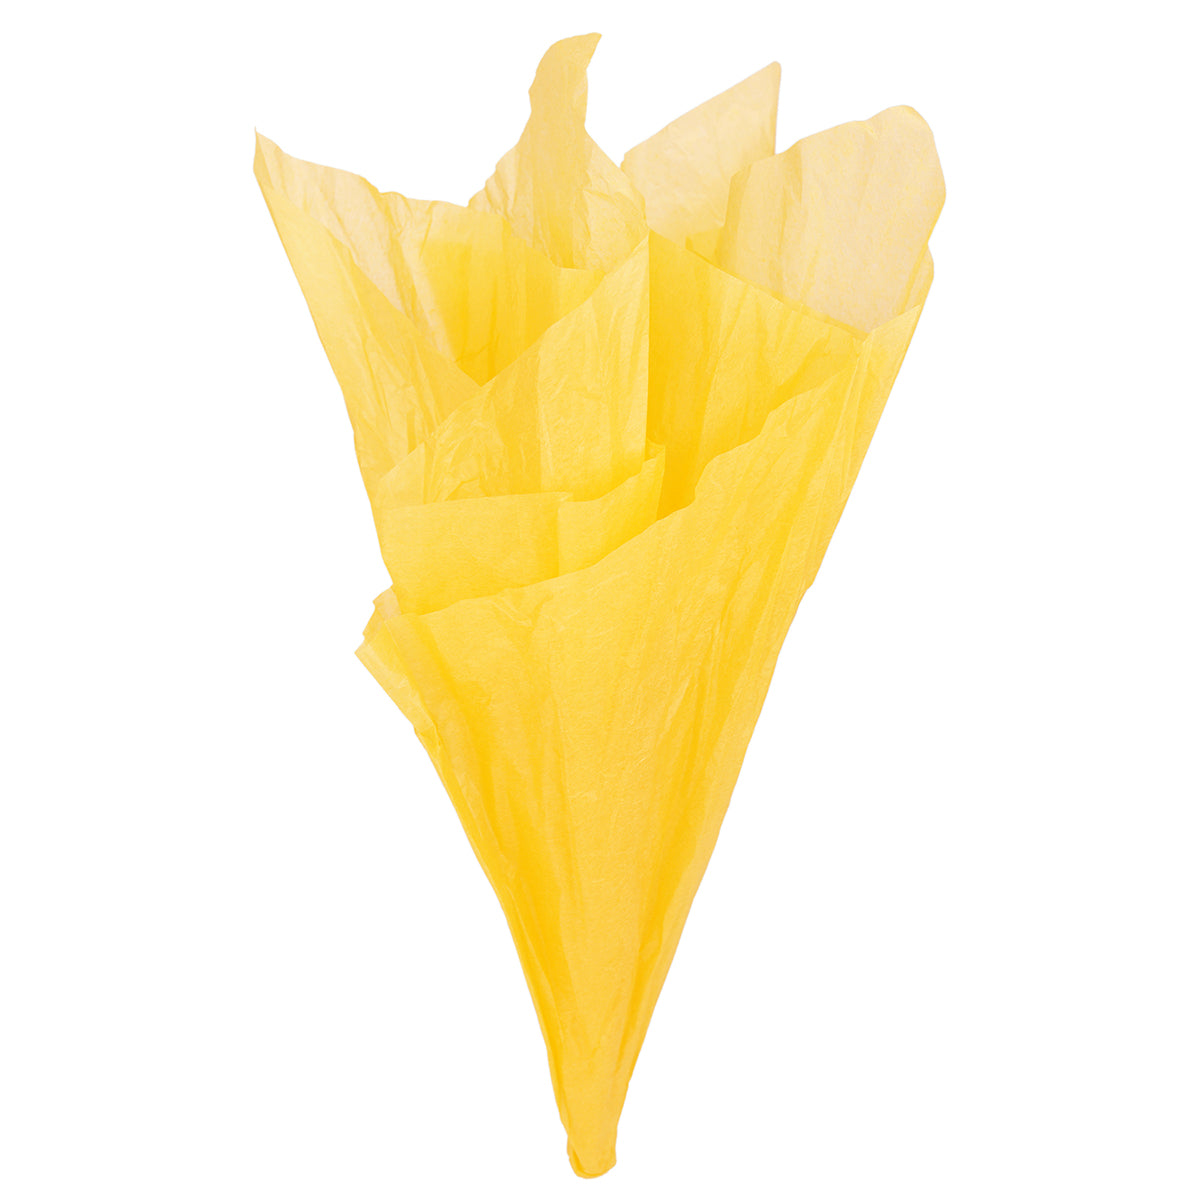 Displaying of a dark yellow tissue paper in ice cream cone shape